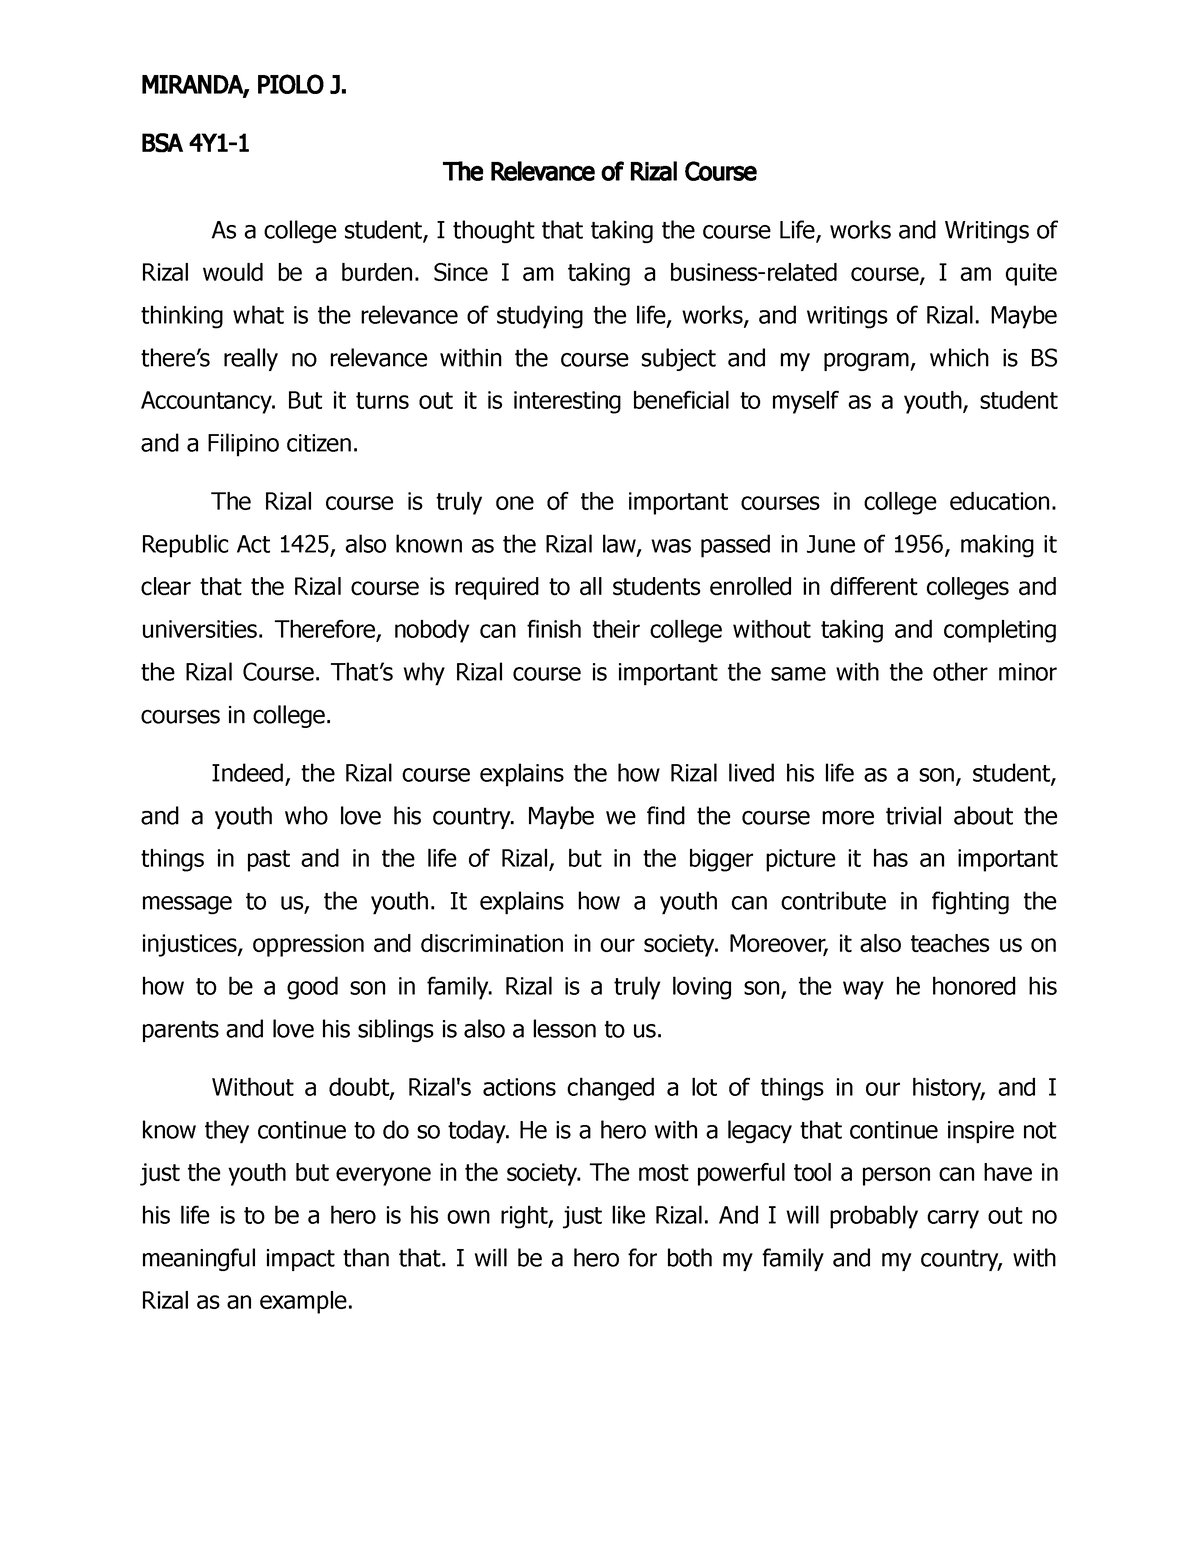 paragraph personal essay on the relevance of the rizal course